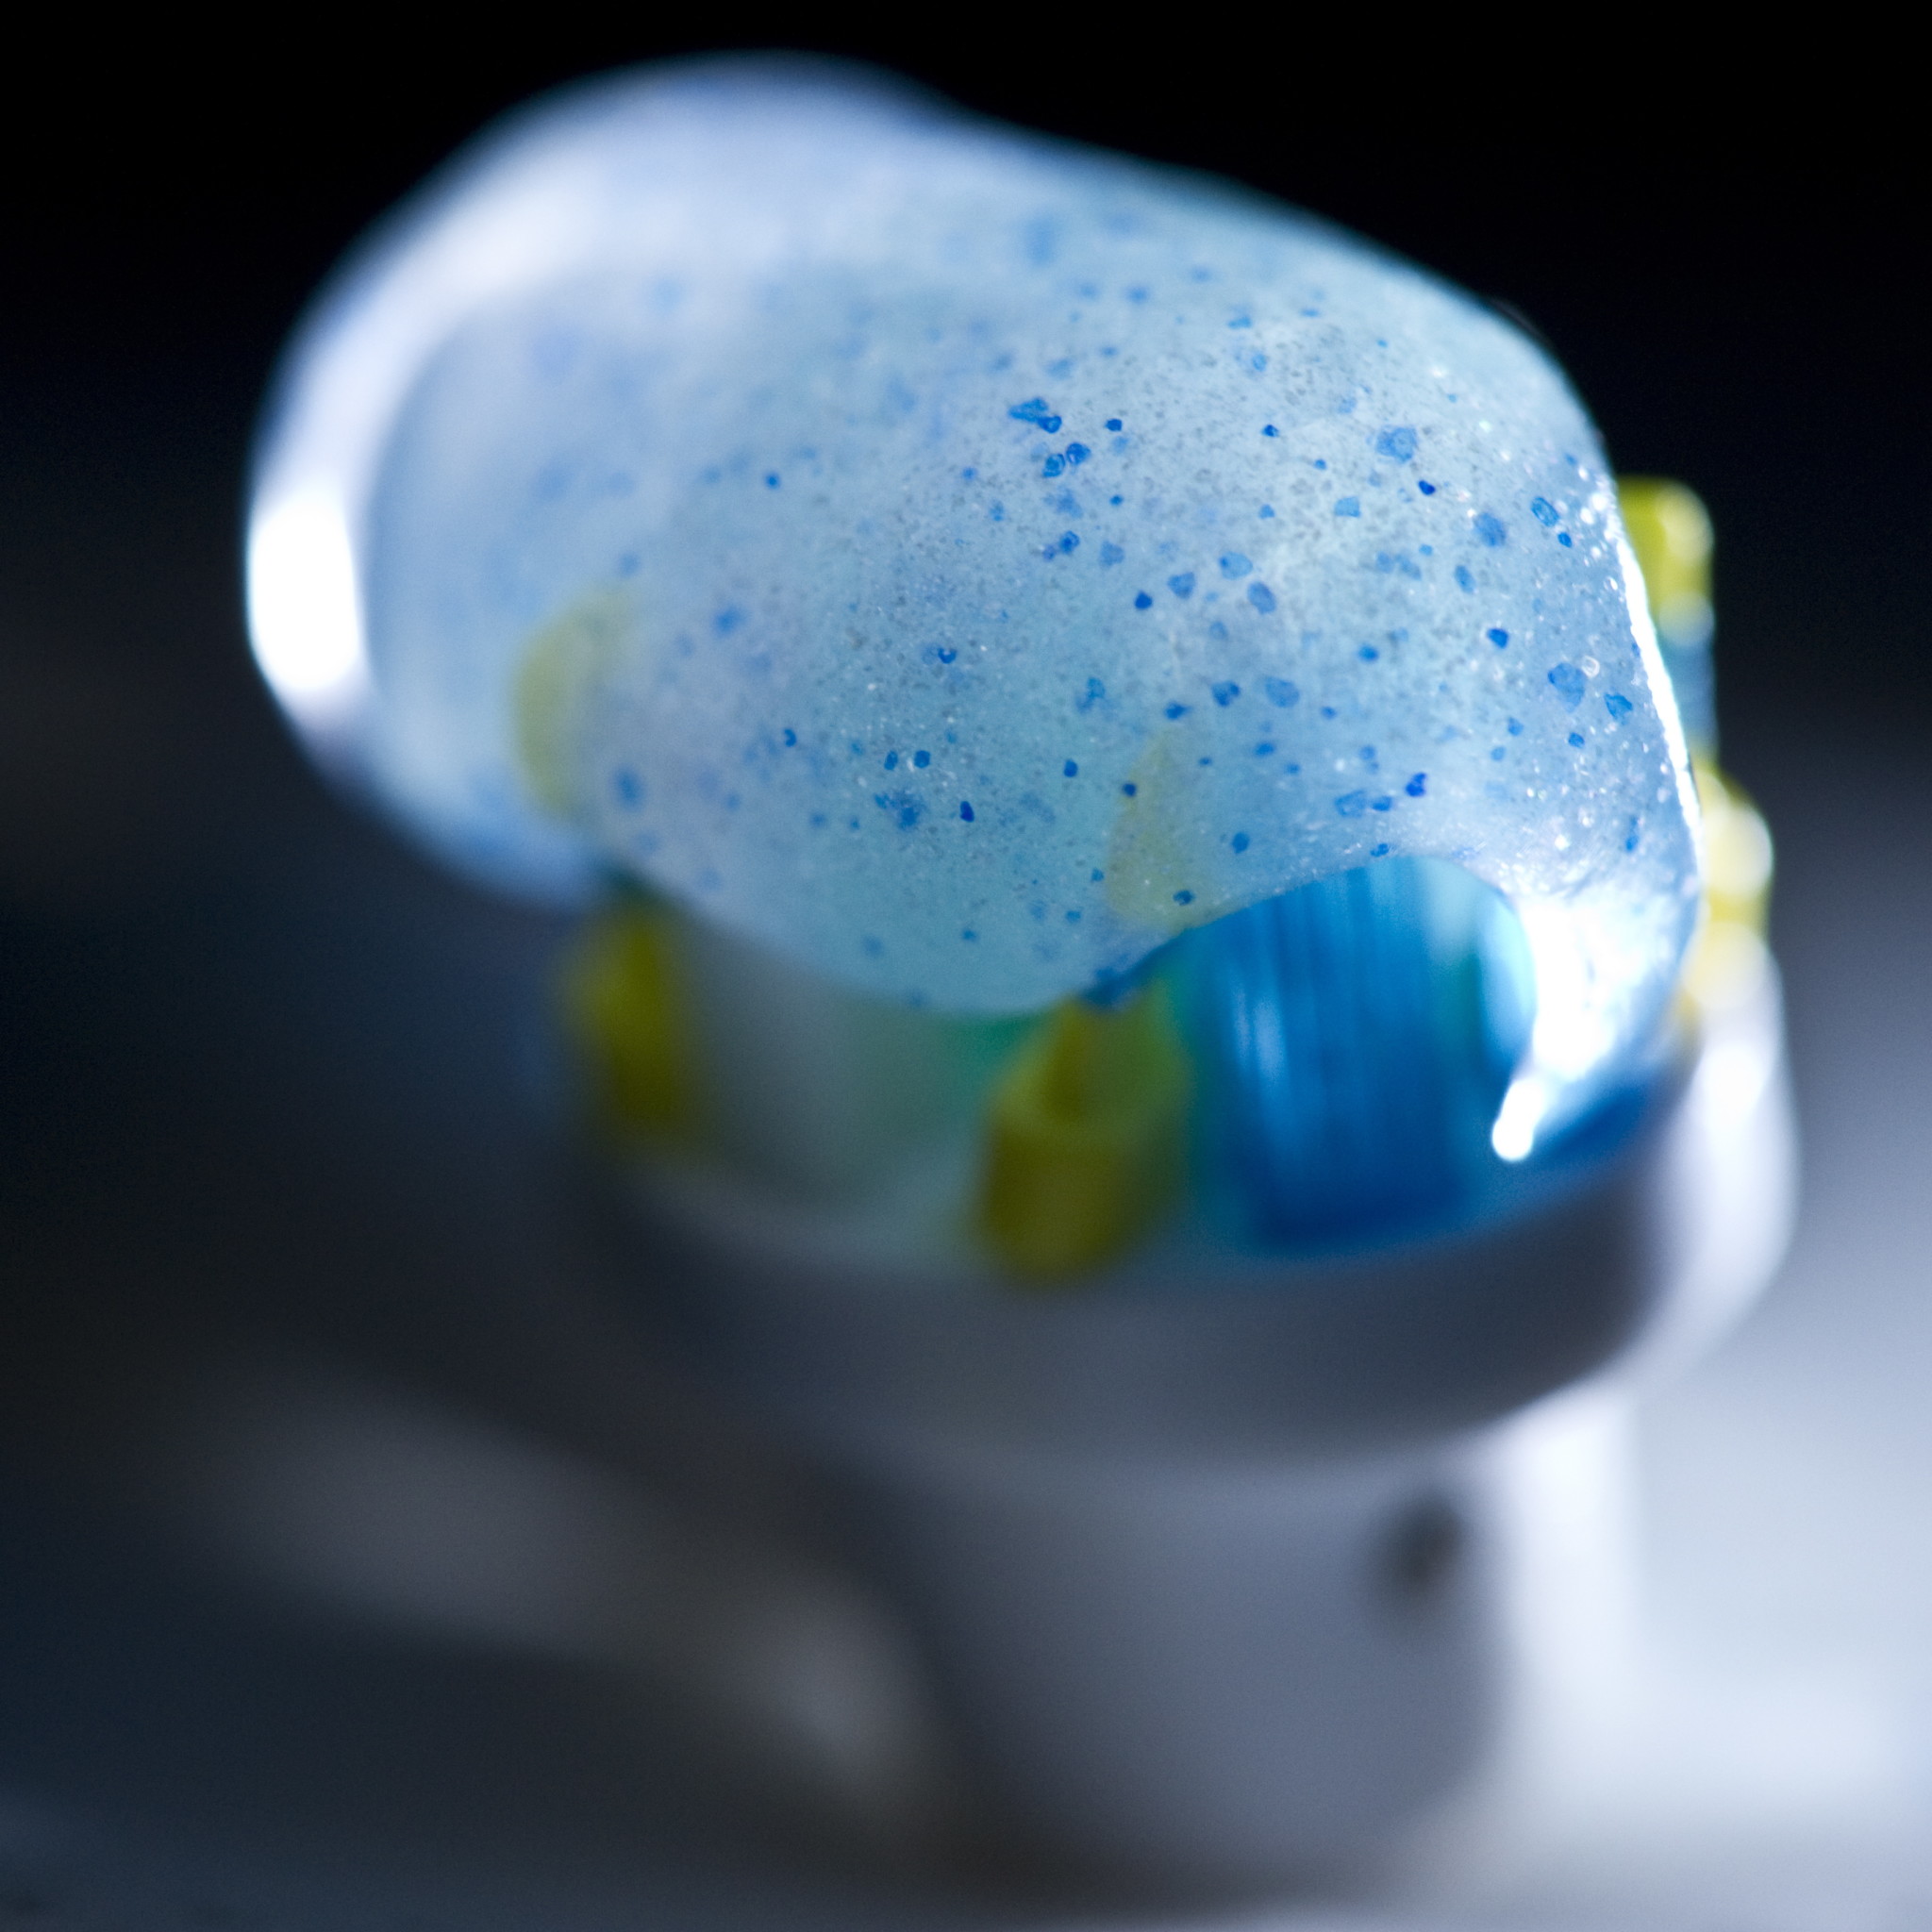 Does your toothpaste contain microplastics? - Blastic